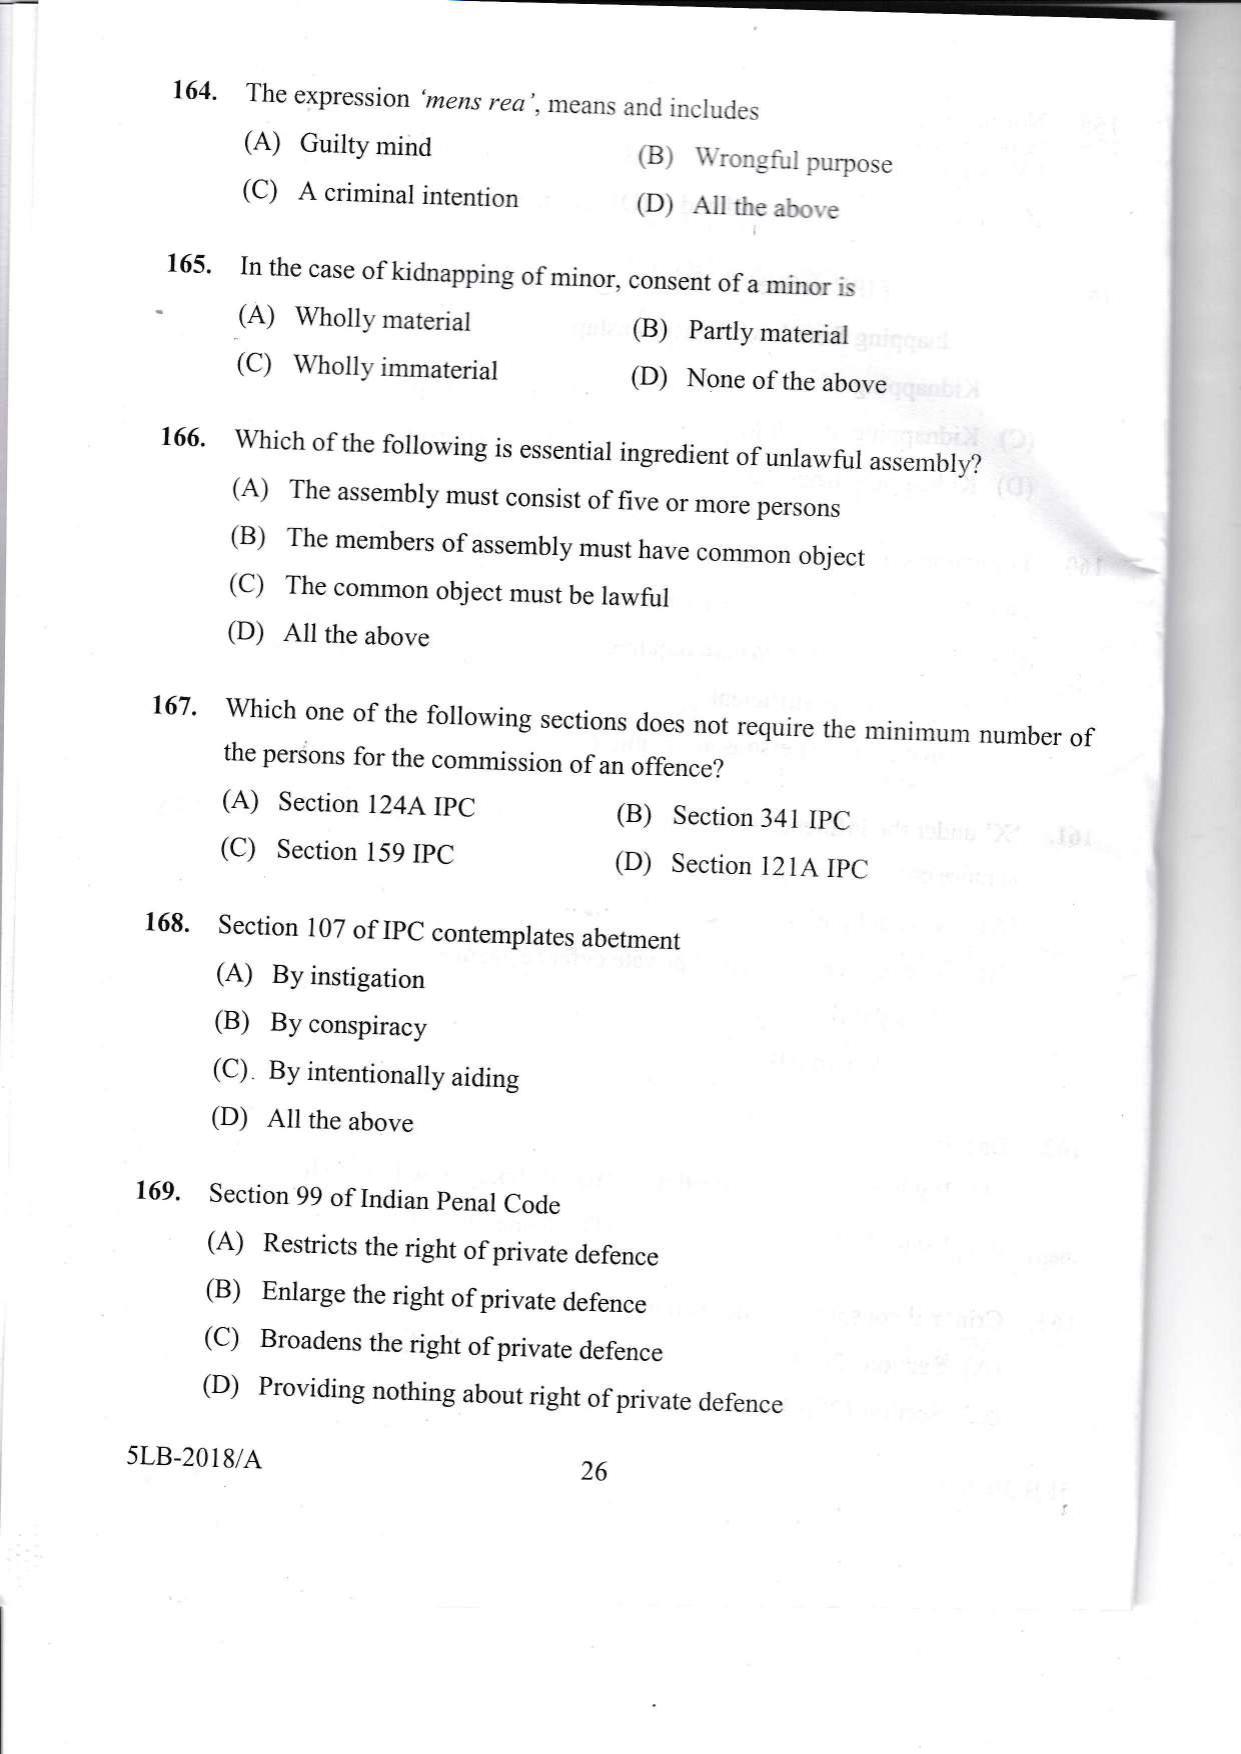 KLEE 5 Year LLB Exam 2018 Question Paper - Page 26